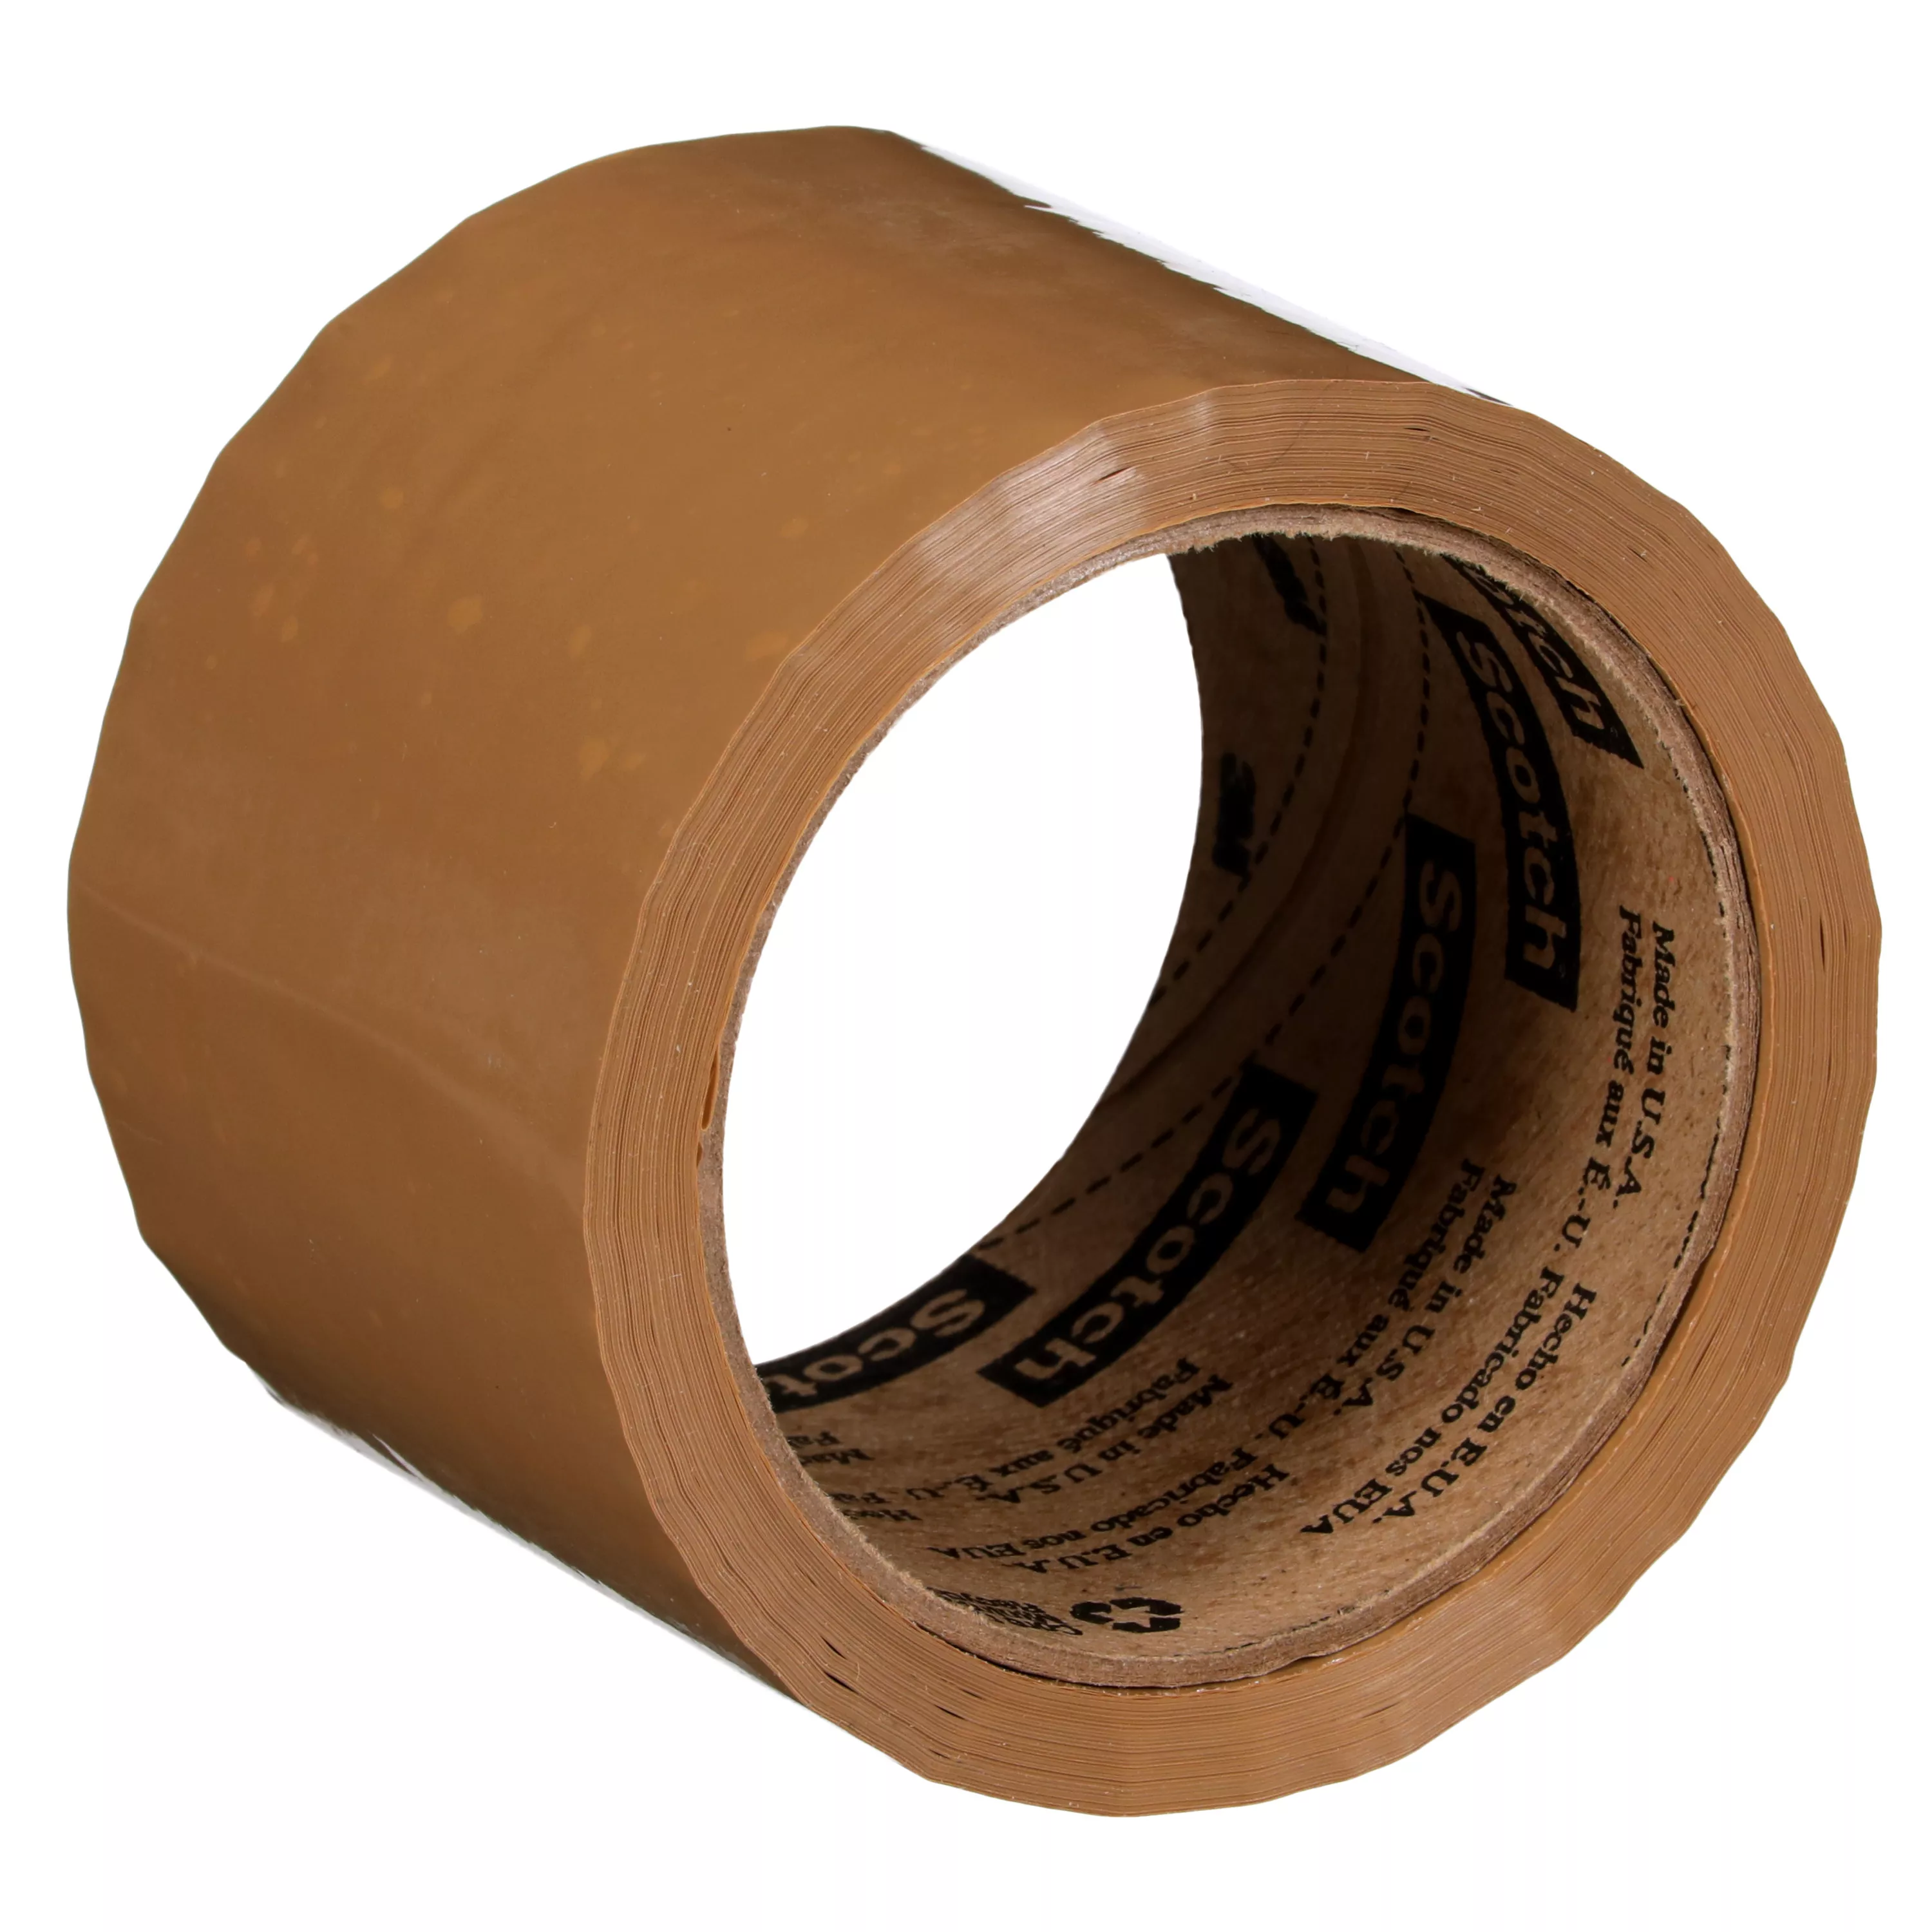 Scotch® Box Sealing Tape 371, Tan, 72 mm x 50 m, 24/Case (6 rolls/pack 4
packs/case), Conveniently Packaged